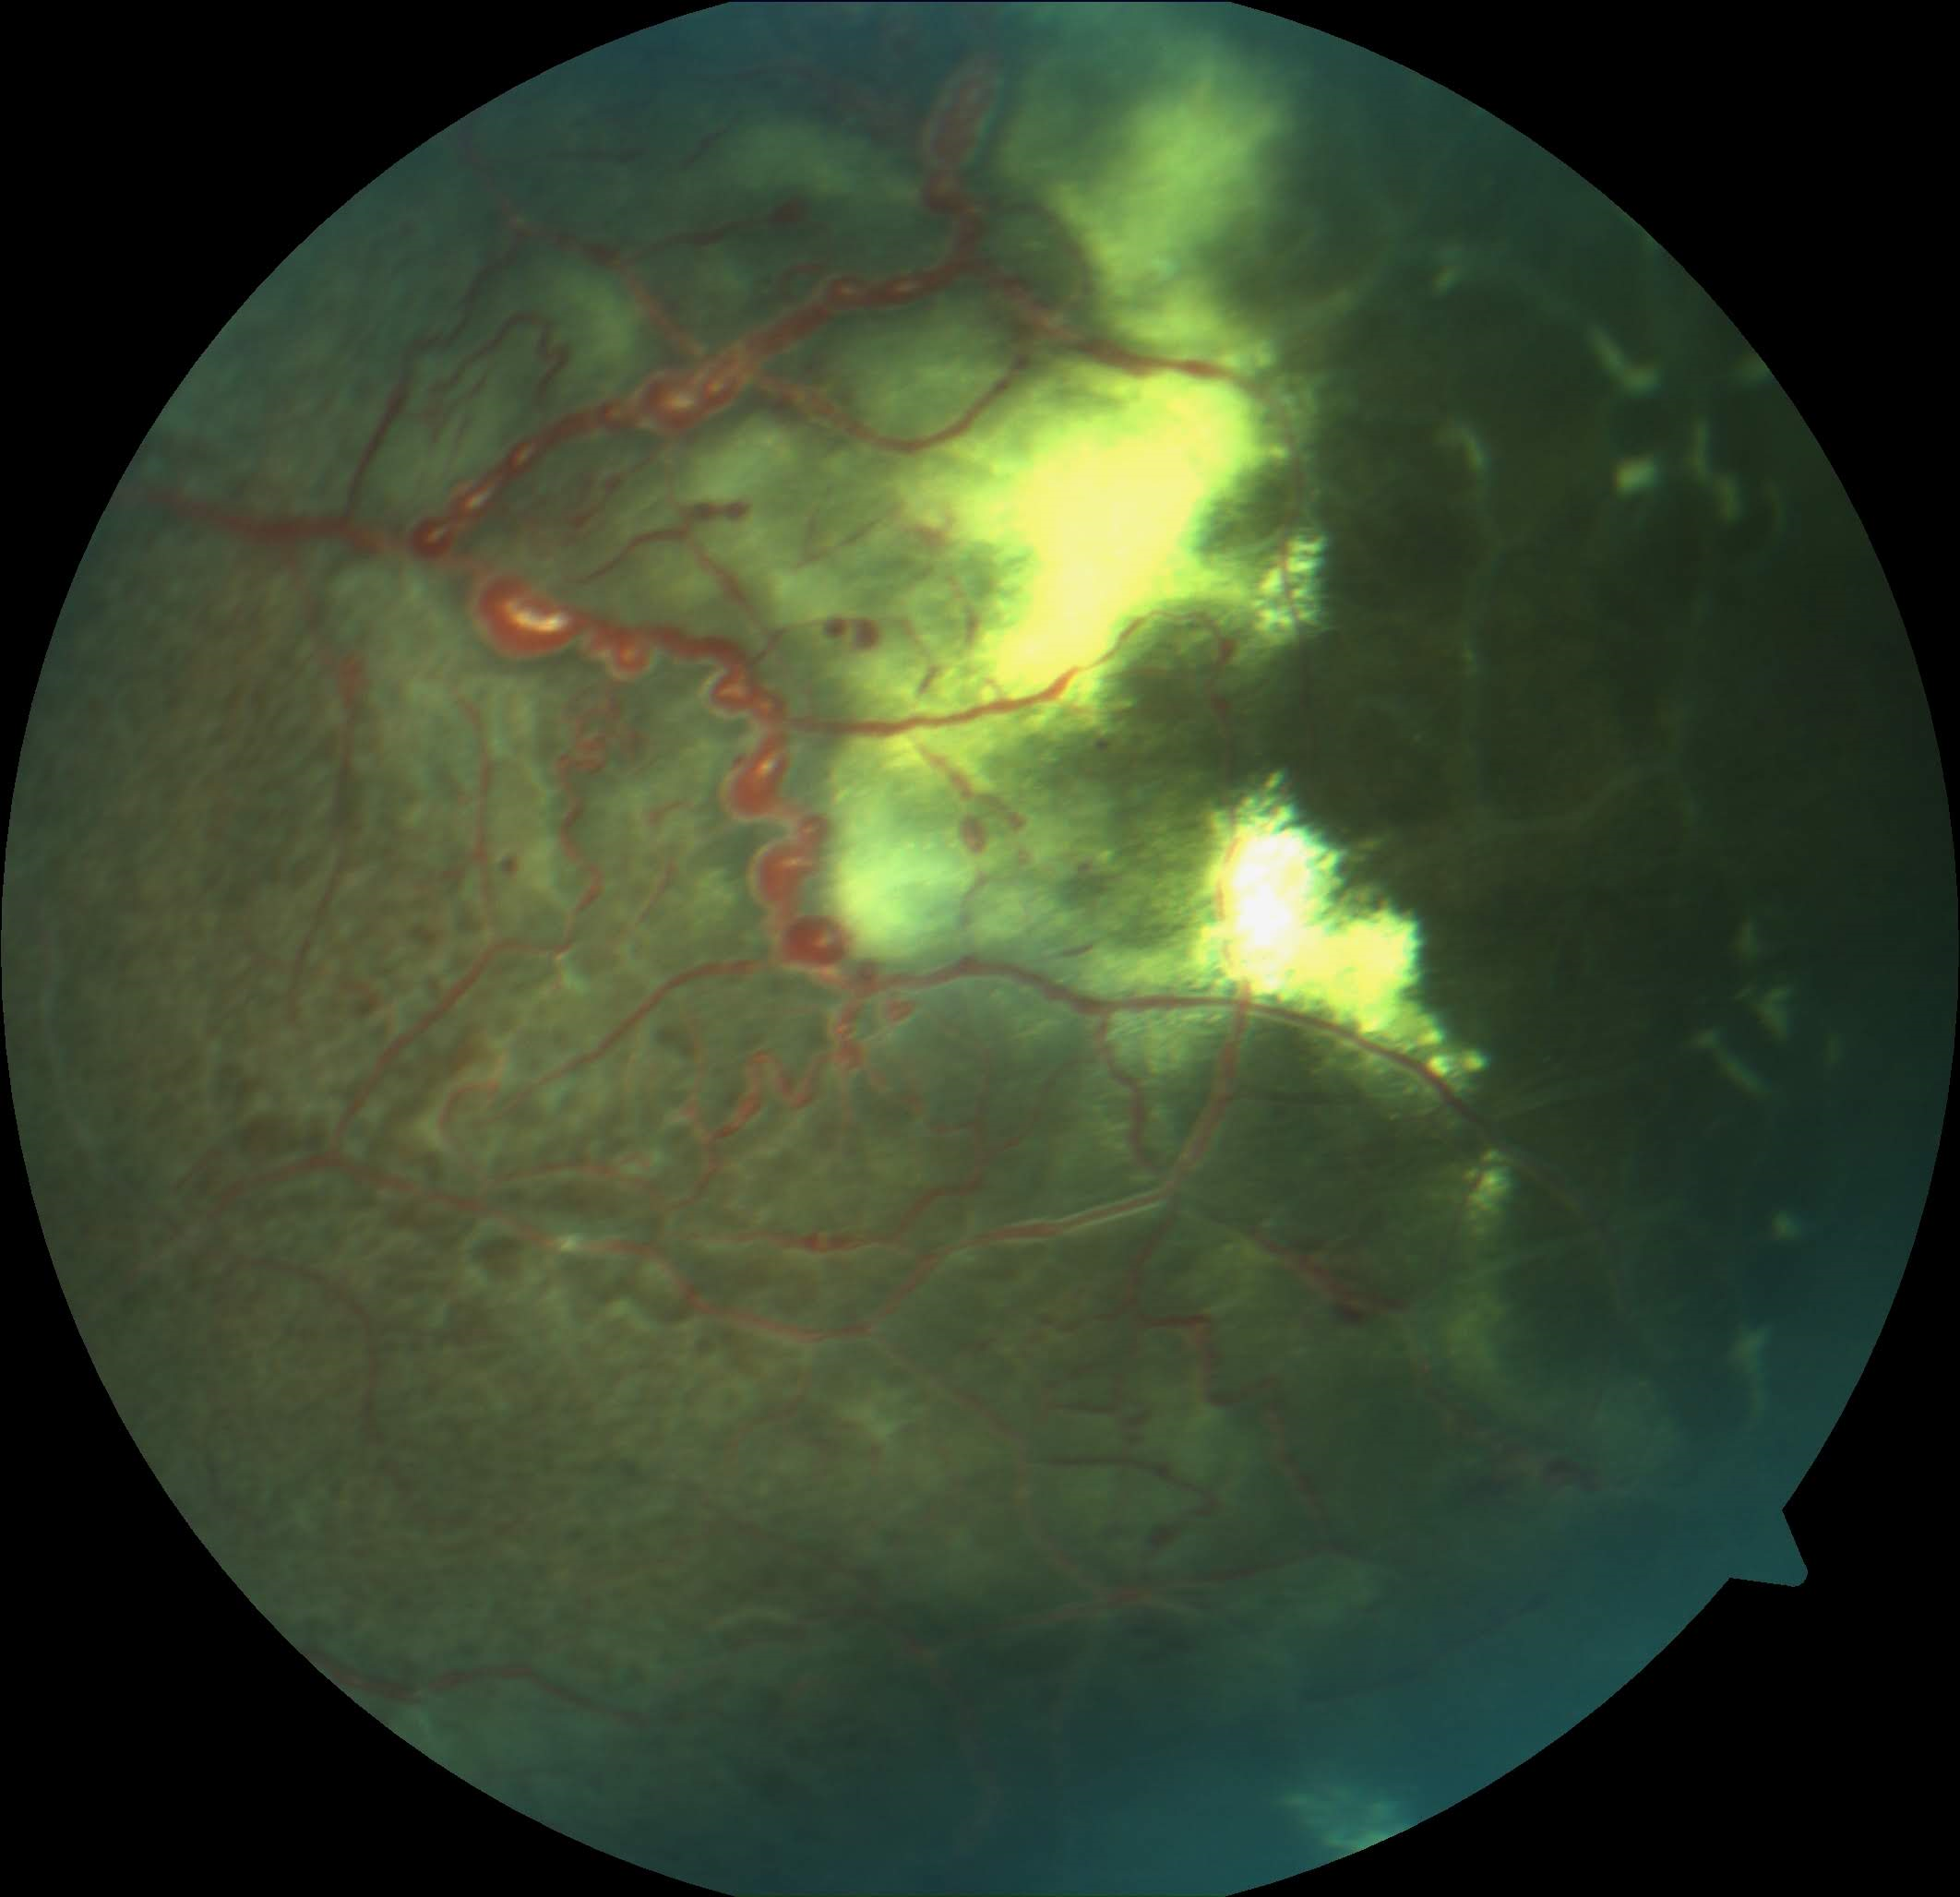 The temporal retina in an eye with Coats disease shows the typical telangiectatic vessels, aneurysms, and hard exudates.